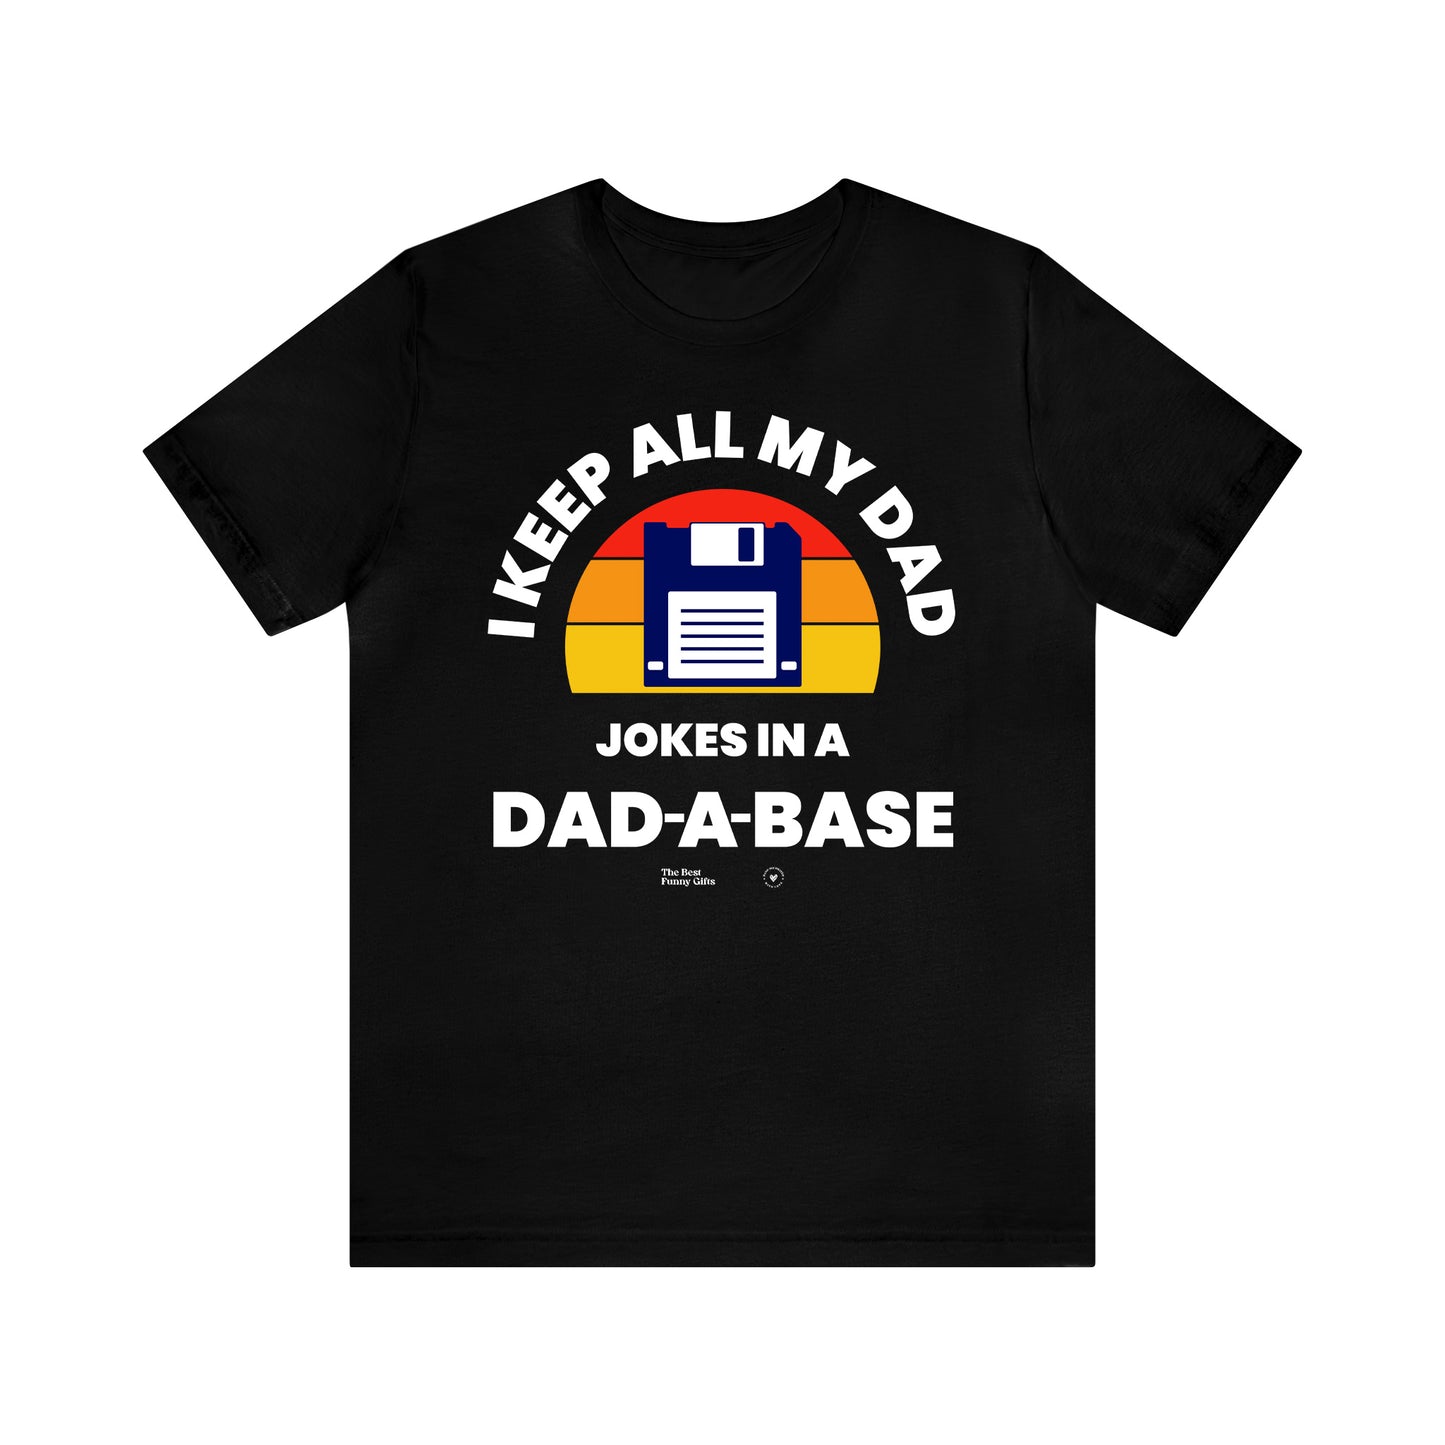 Mens T Shirts - I Keep All My Dad Jokes in a Dad a Base - Funny Men T Shirts